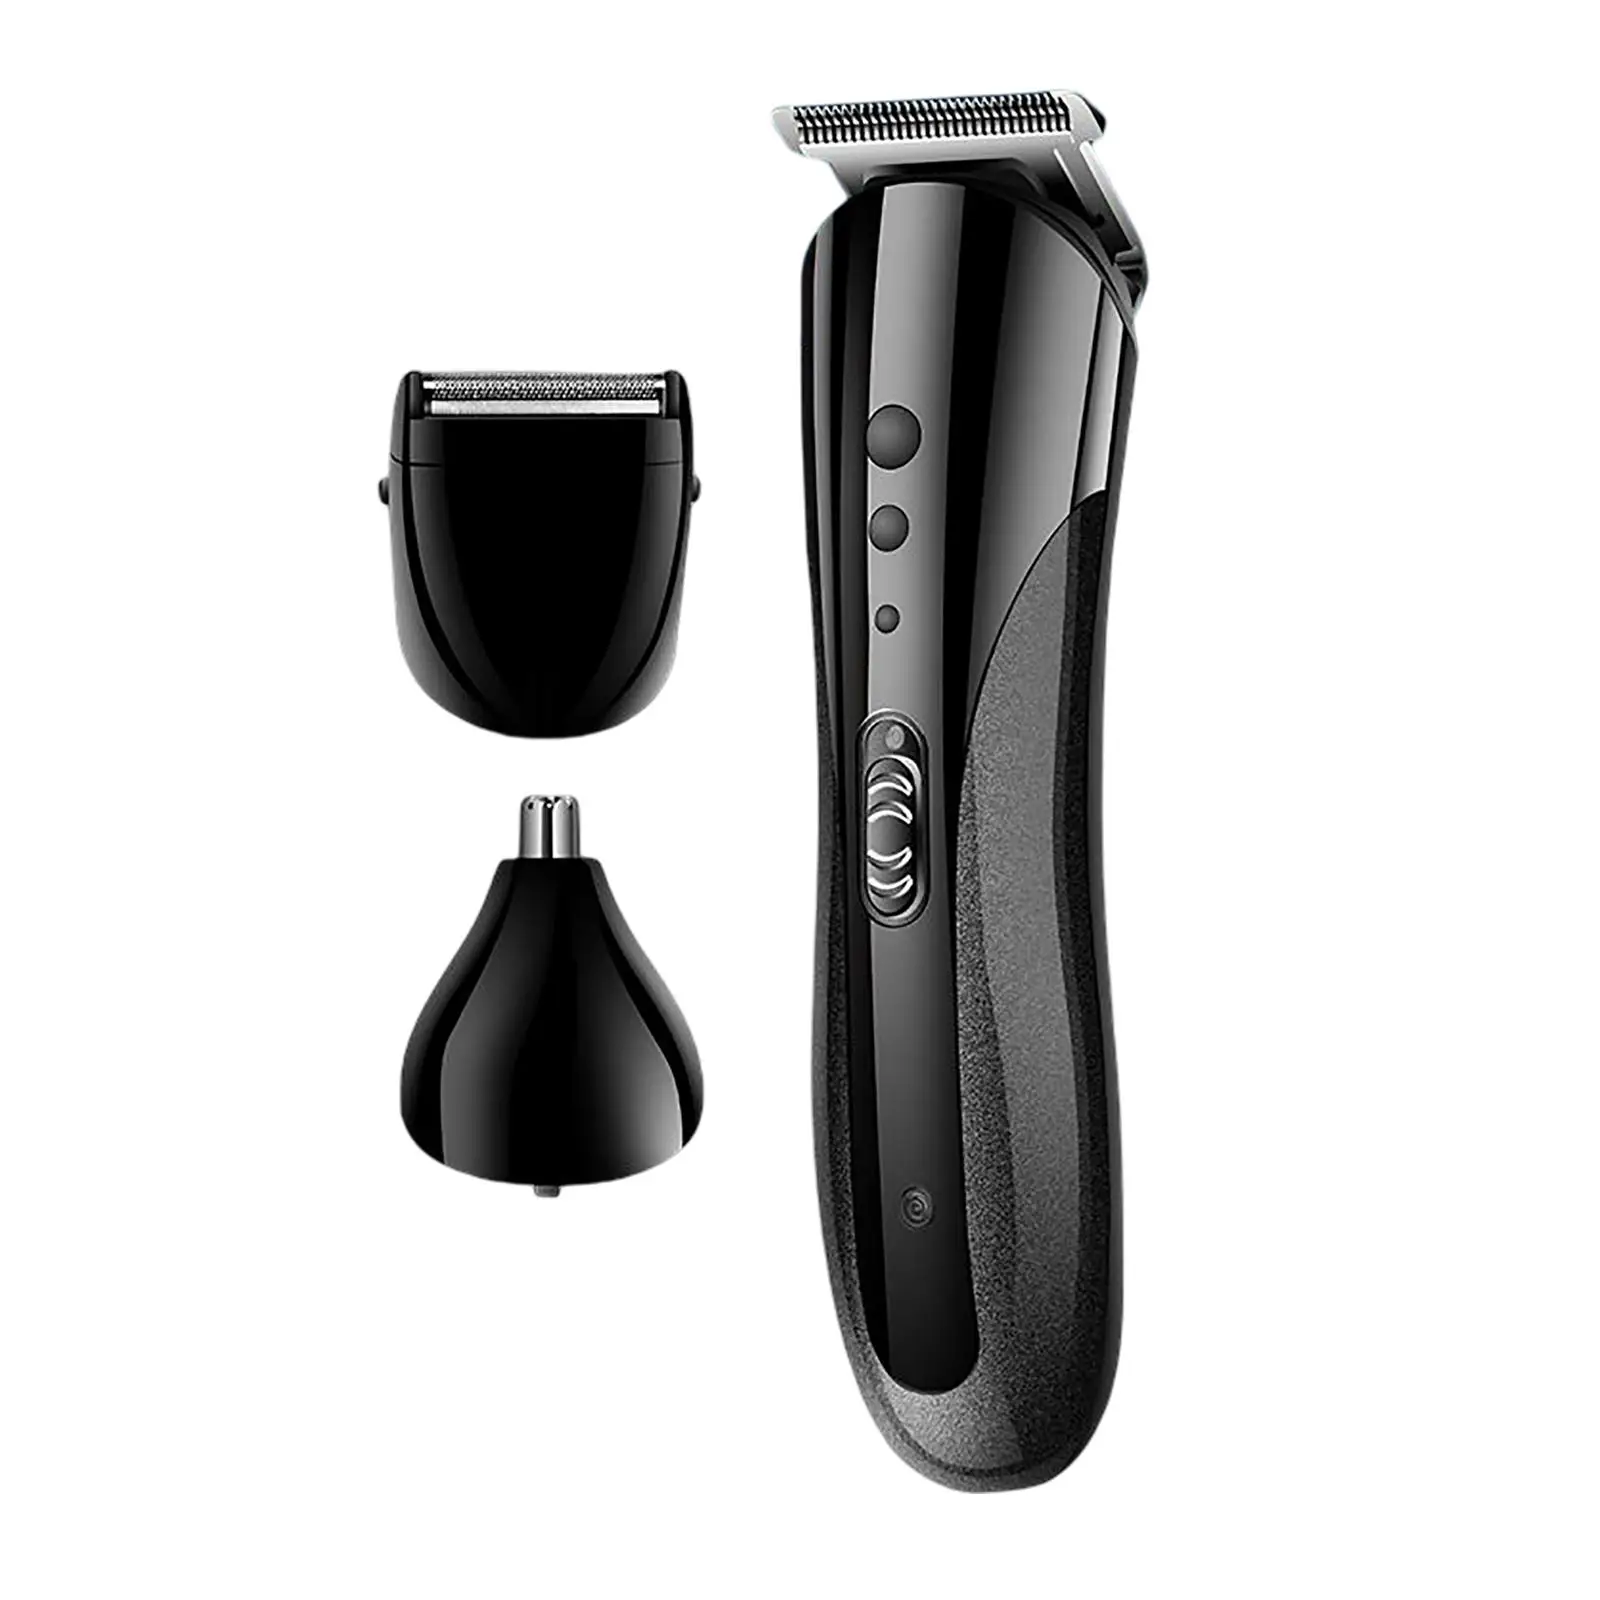 Cordless Beard Trimmer Hair Clippers USB Rechargeable Facial Professional Hair Shaver Barber Tool Dad Gifts Hair Grooming Kit EU